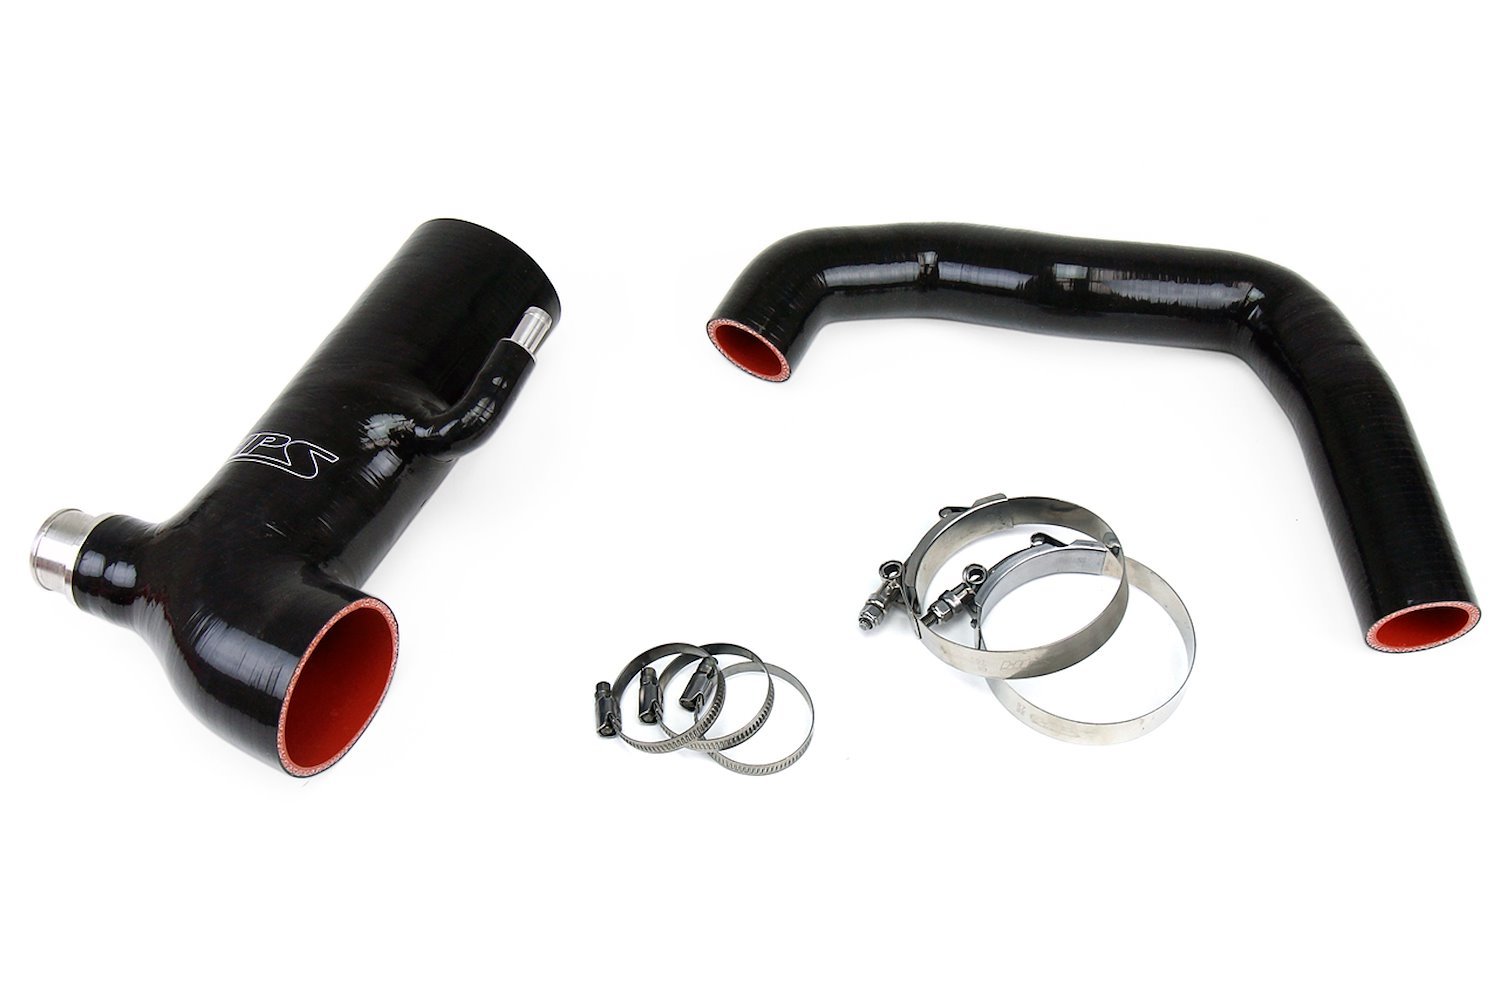 57-1293-BLK Silicone Air Intake, Dyno Proven +1.4 HP, +1.2 TQ, High Air Flow, Better Throttle Response